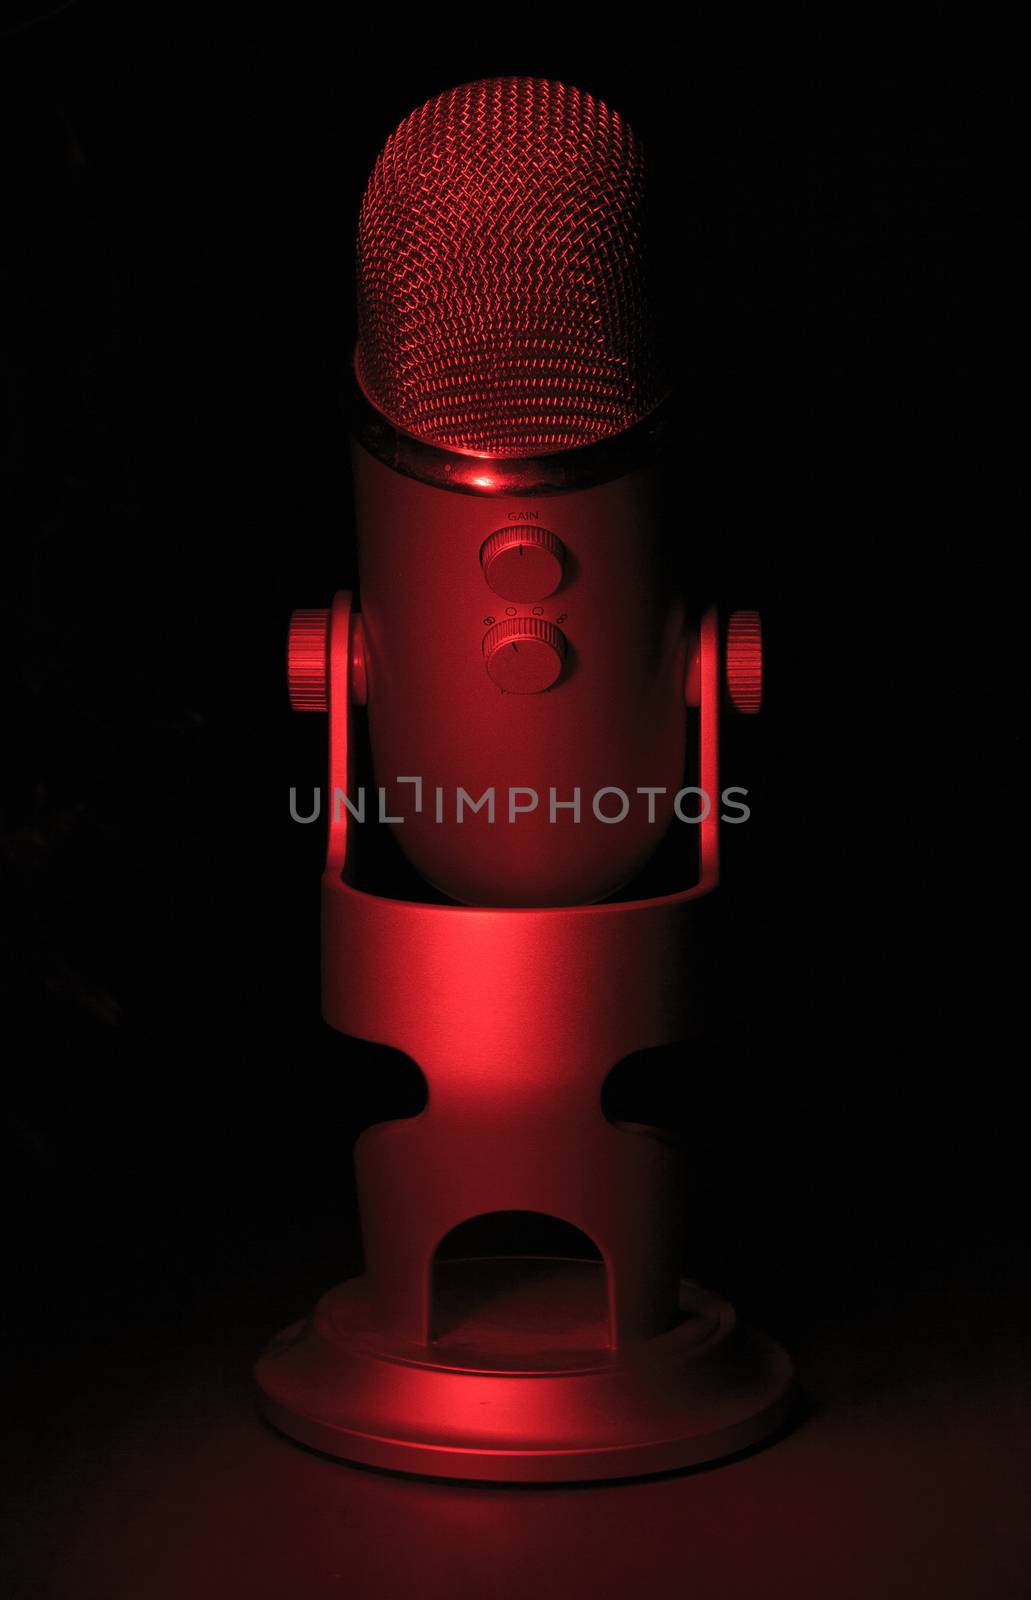 Vintage silver MIc with red color by nachrc2001